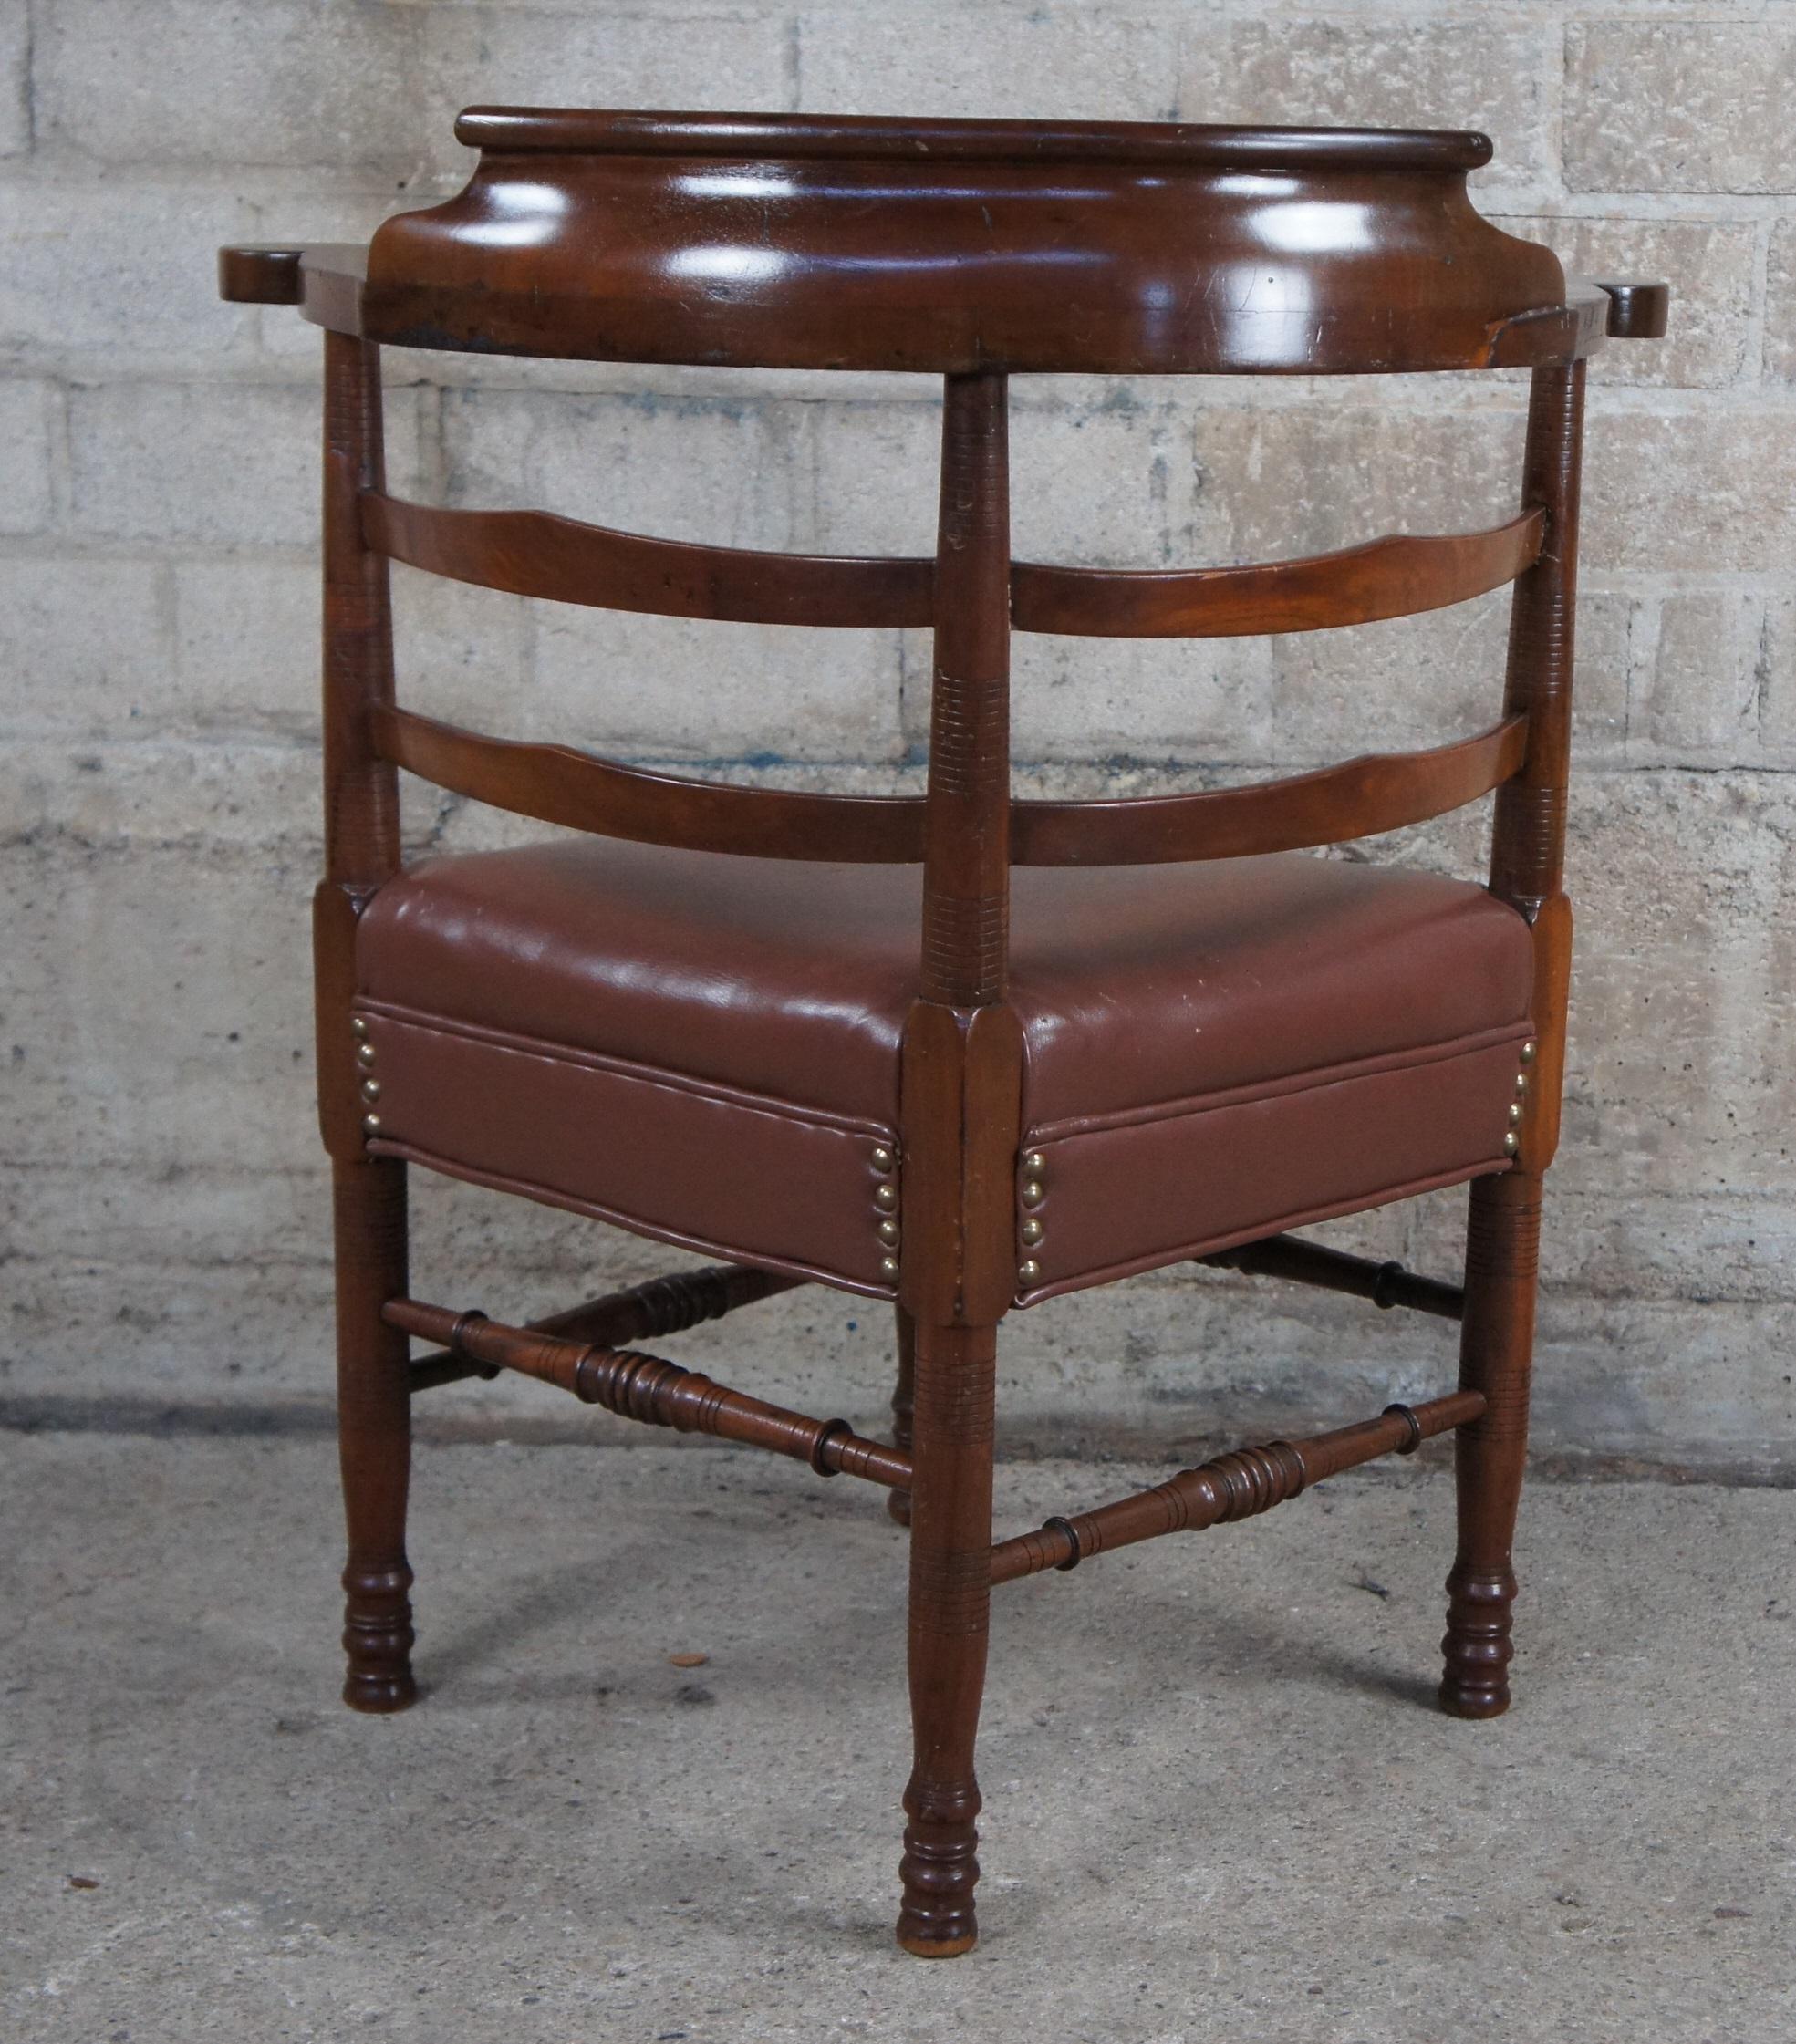 20th Century Antique English Country Mahogany Ladderback Roundabout Corner Arm Chair Seat For Sale